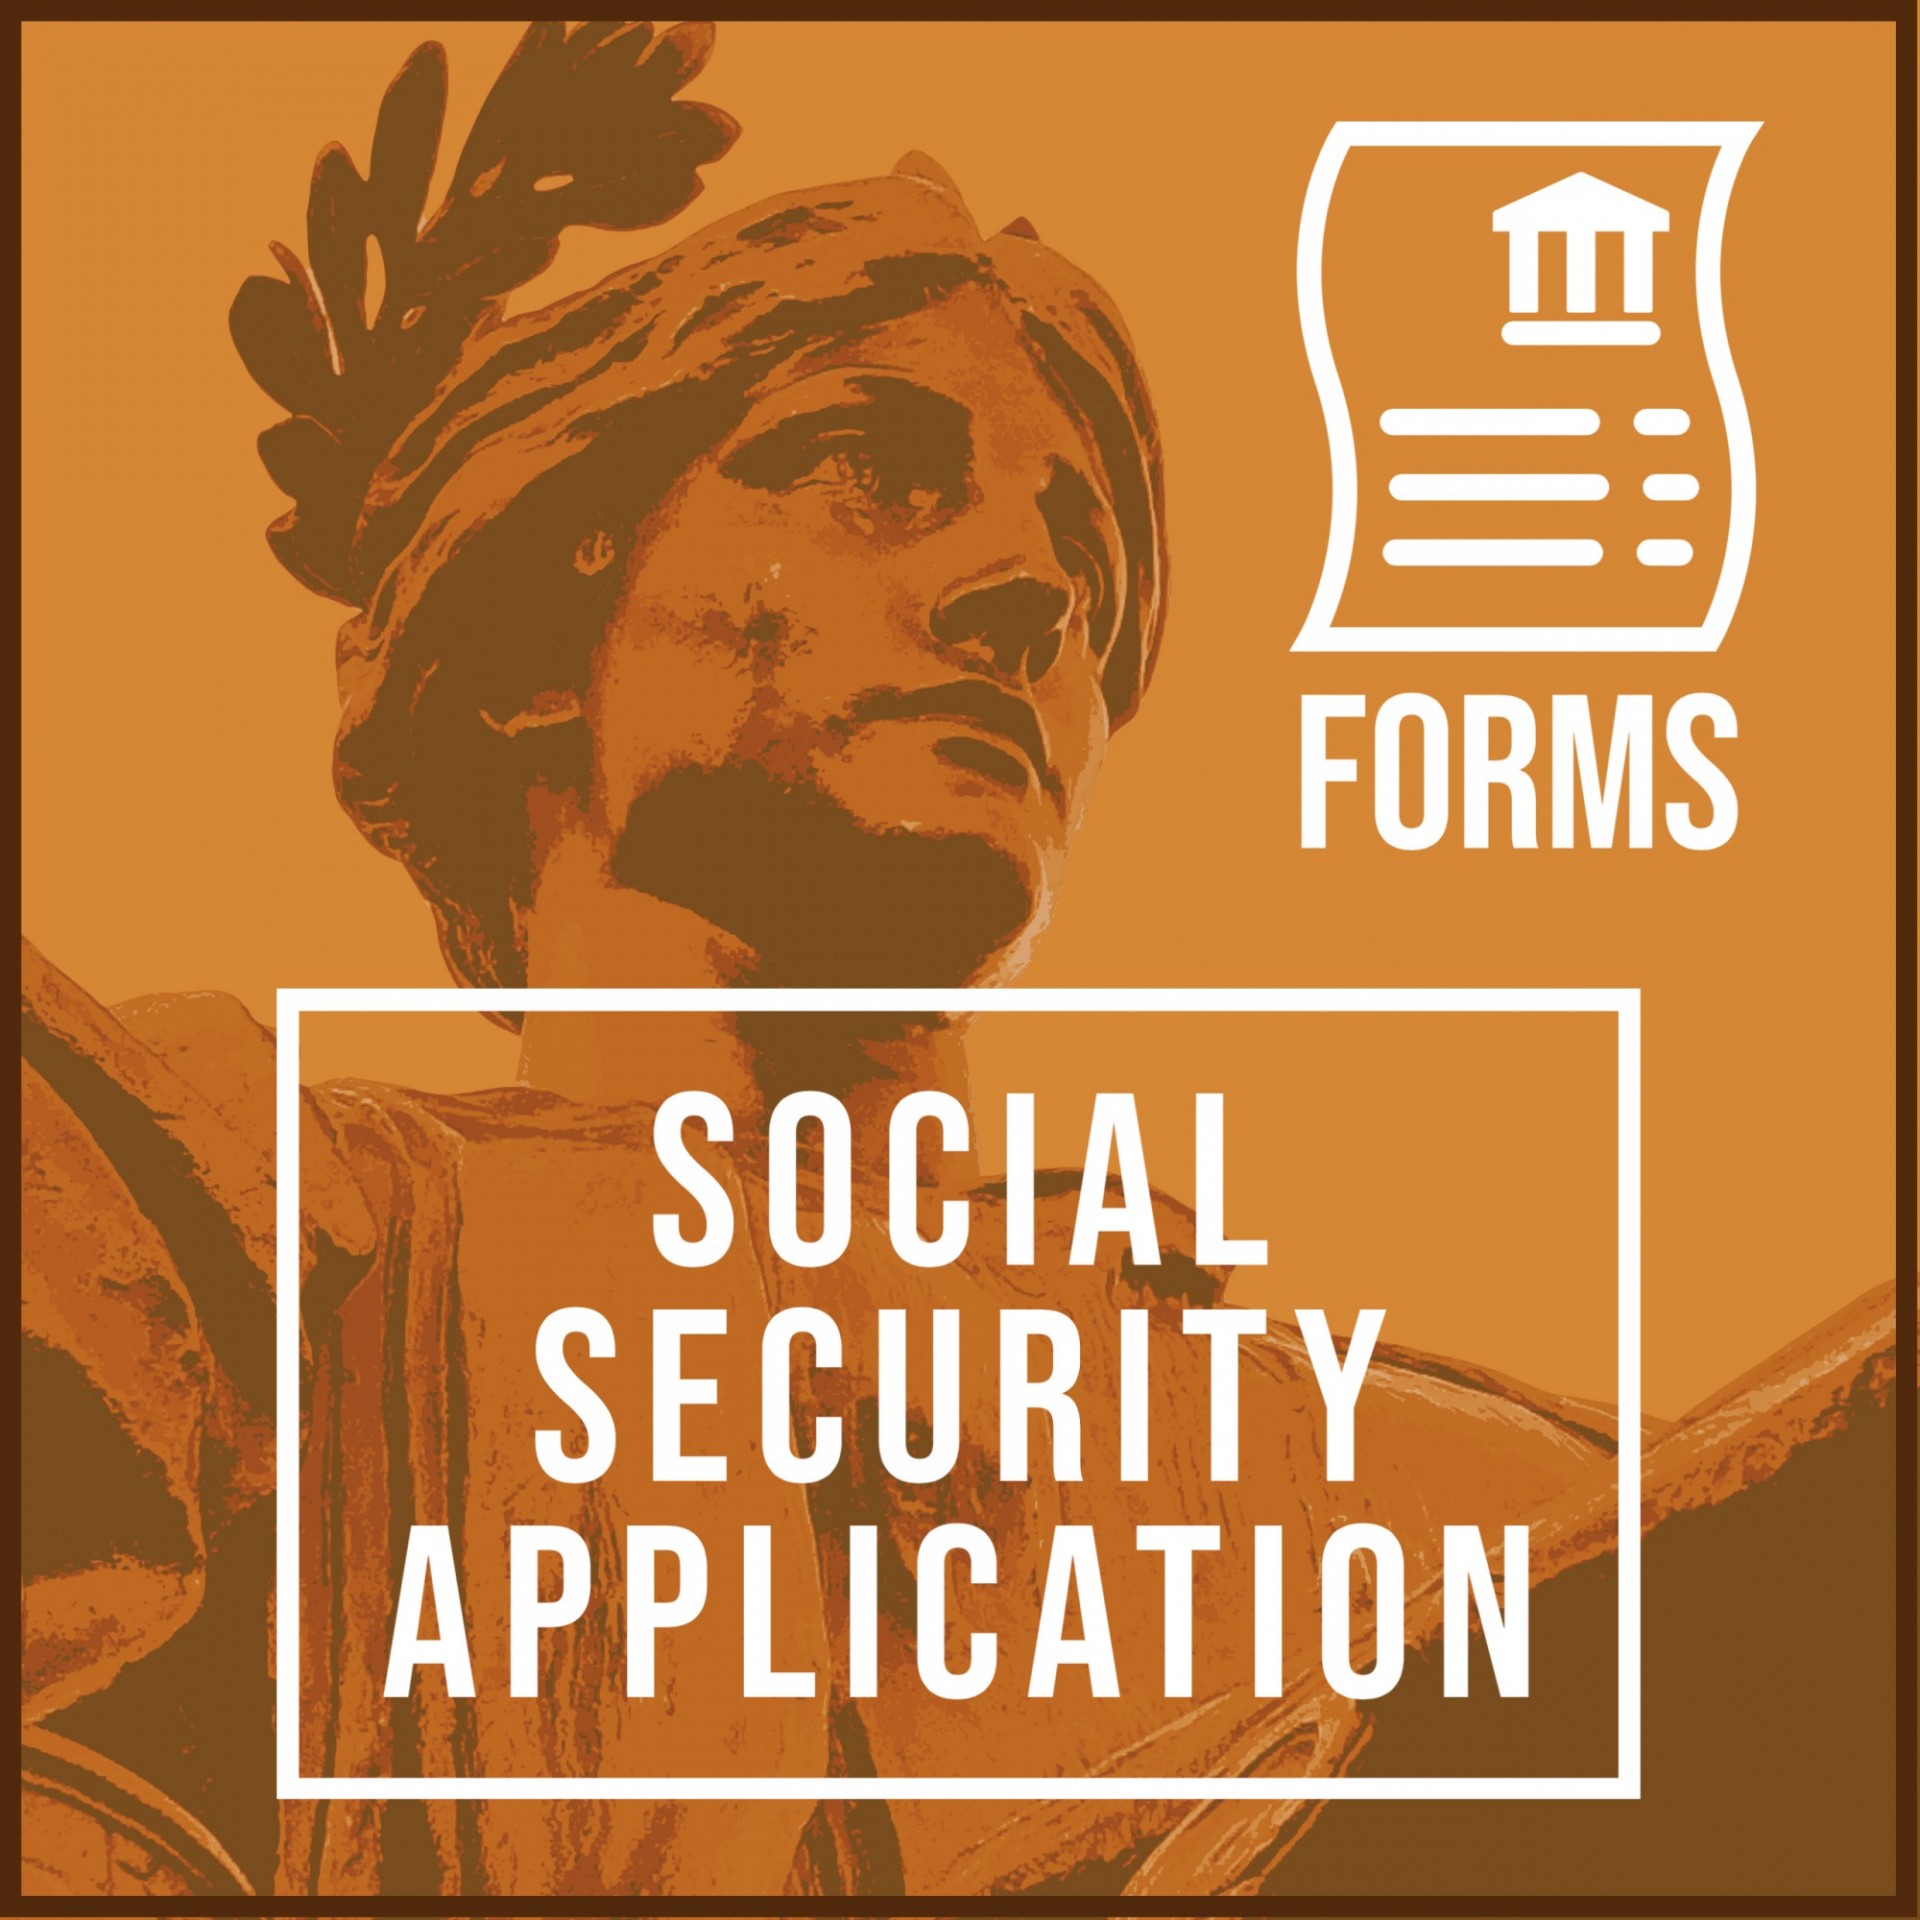 Forms Icon: Social Security Application